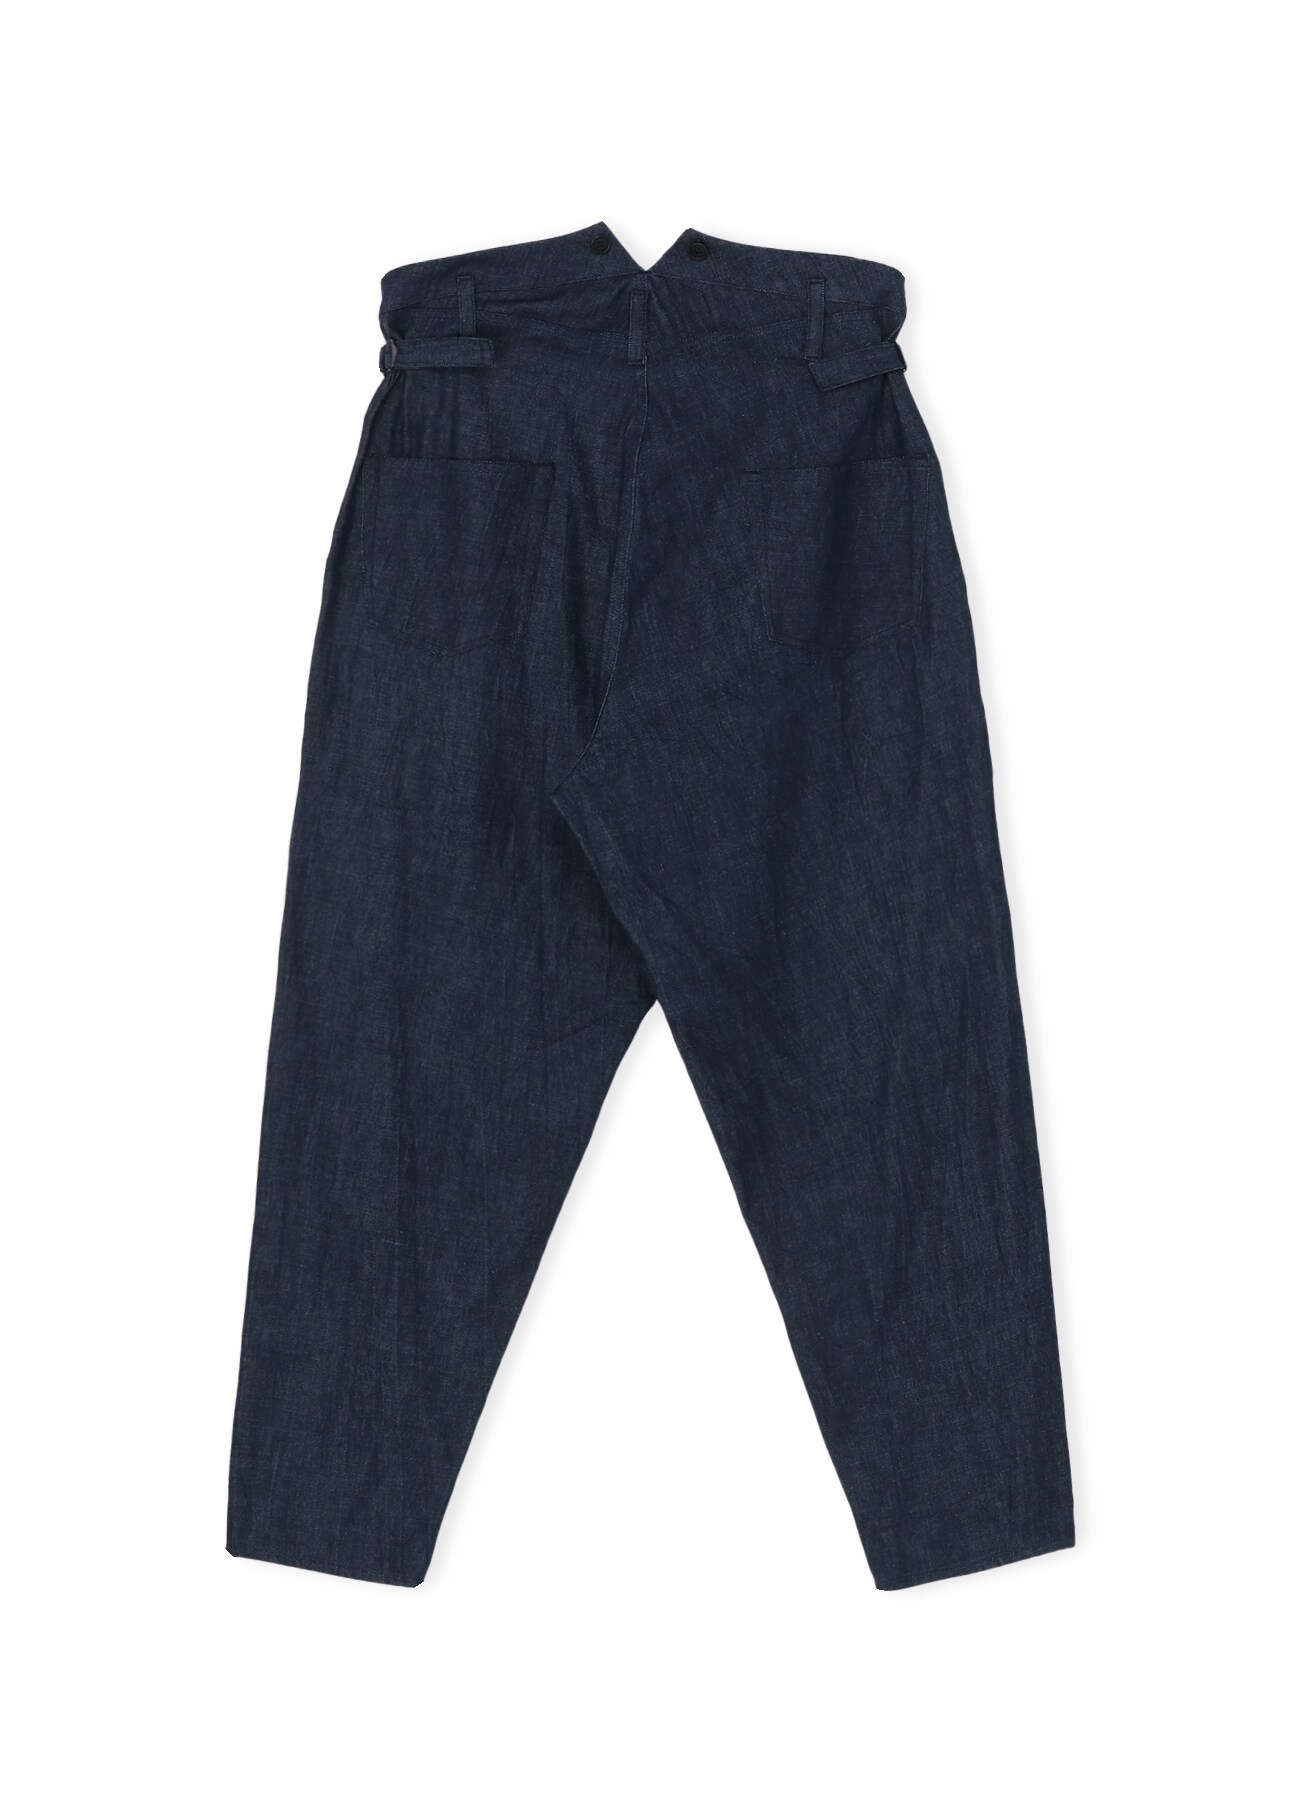 DENIM PANTS WITH SUSPENDER BUTTONS AND ADJUSTABLE SIDE TABS(S 